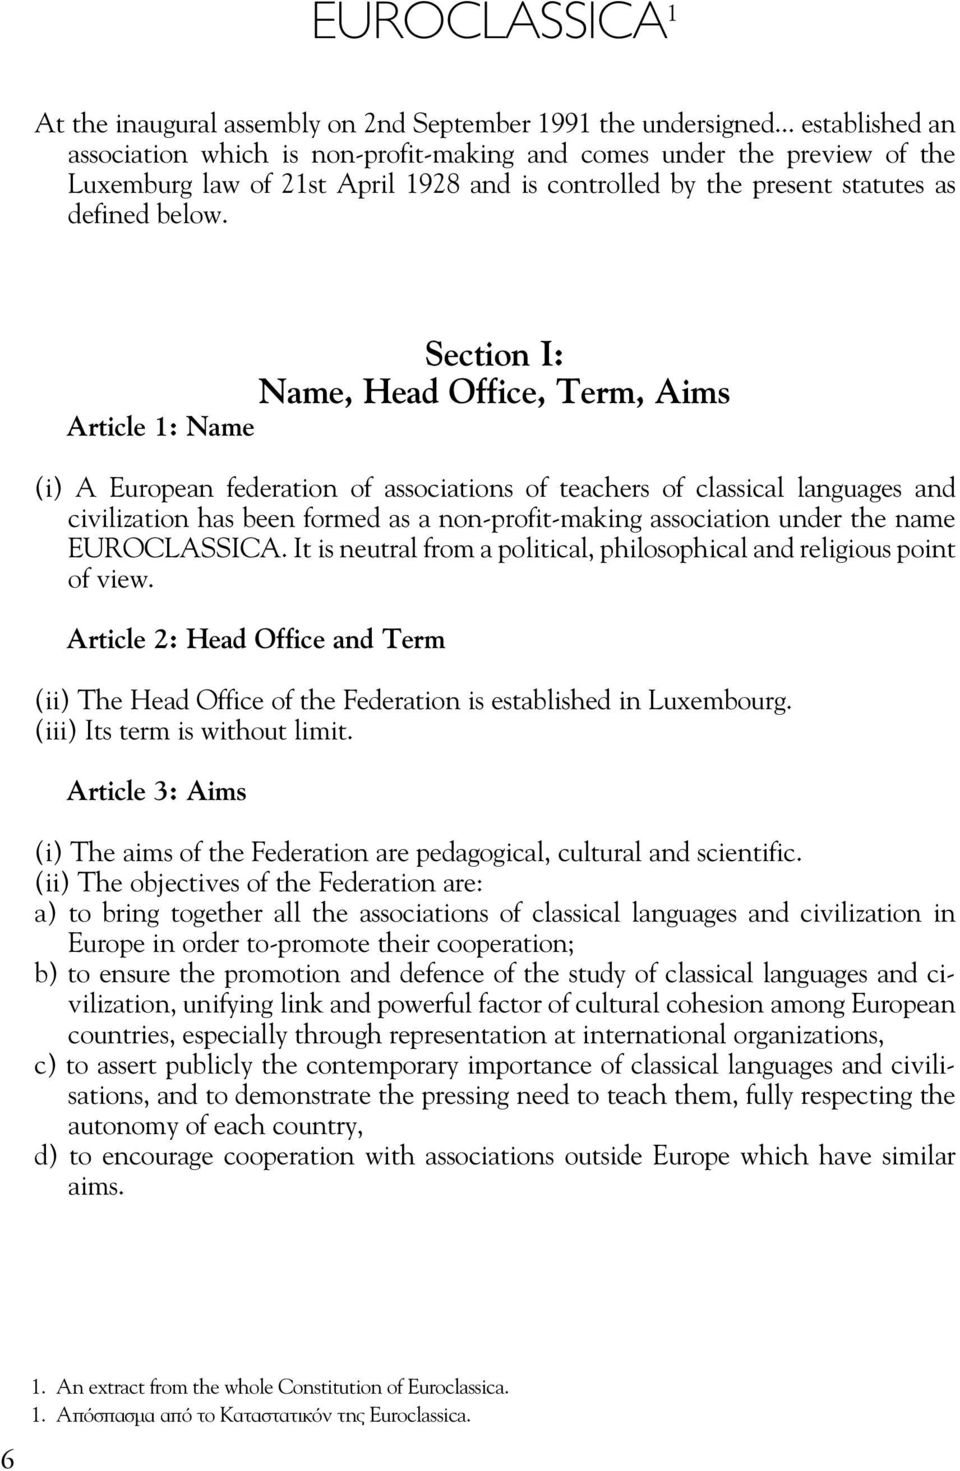 Section I: Name, Head Office, Term, Aims Article 1: Name (i) A European federation of associations of teachers of classical languages and civilization has been formed as a non-profit-making